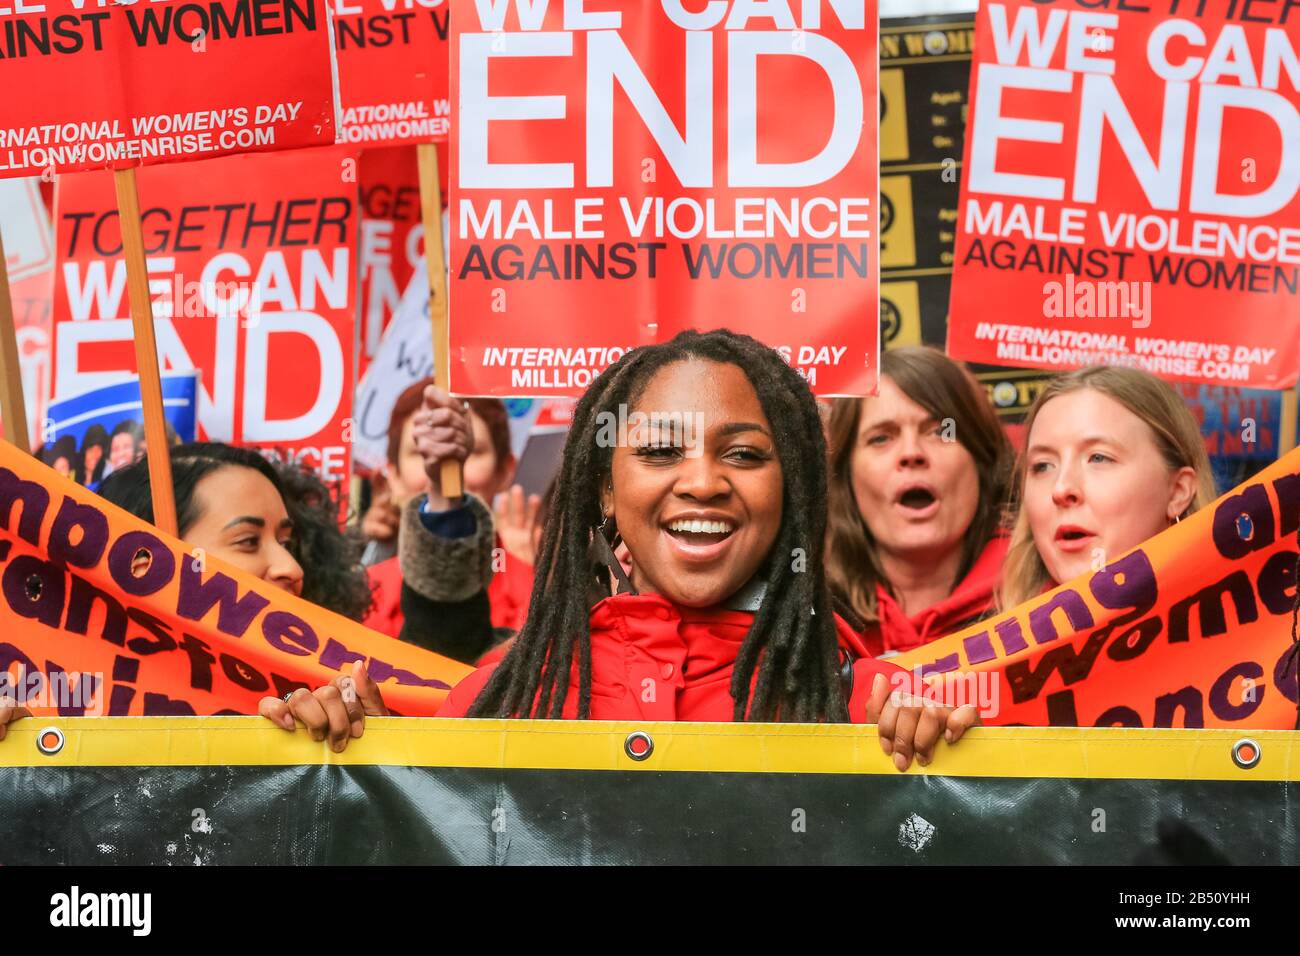 London, UK. 7th Mar, 2020. Thousands of women from all walks of life once again unite to march from Oxford Street to Trafalgar Square to highlight and end male violence against women and girls in the UK and globally. The march is organised by The Million Women Rise Coalition with support from many local ethnic communities. Credit: Imageplotter/Alamy Live News Stock Photo